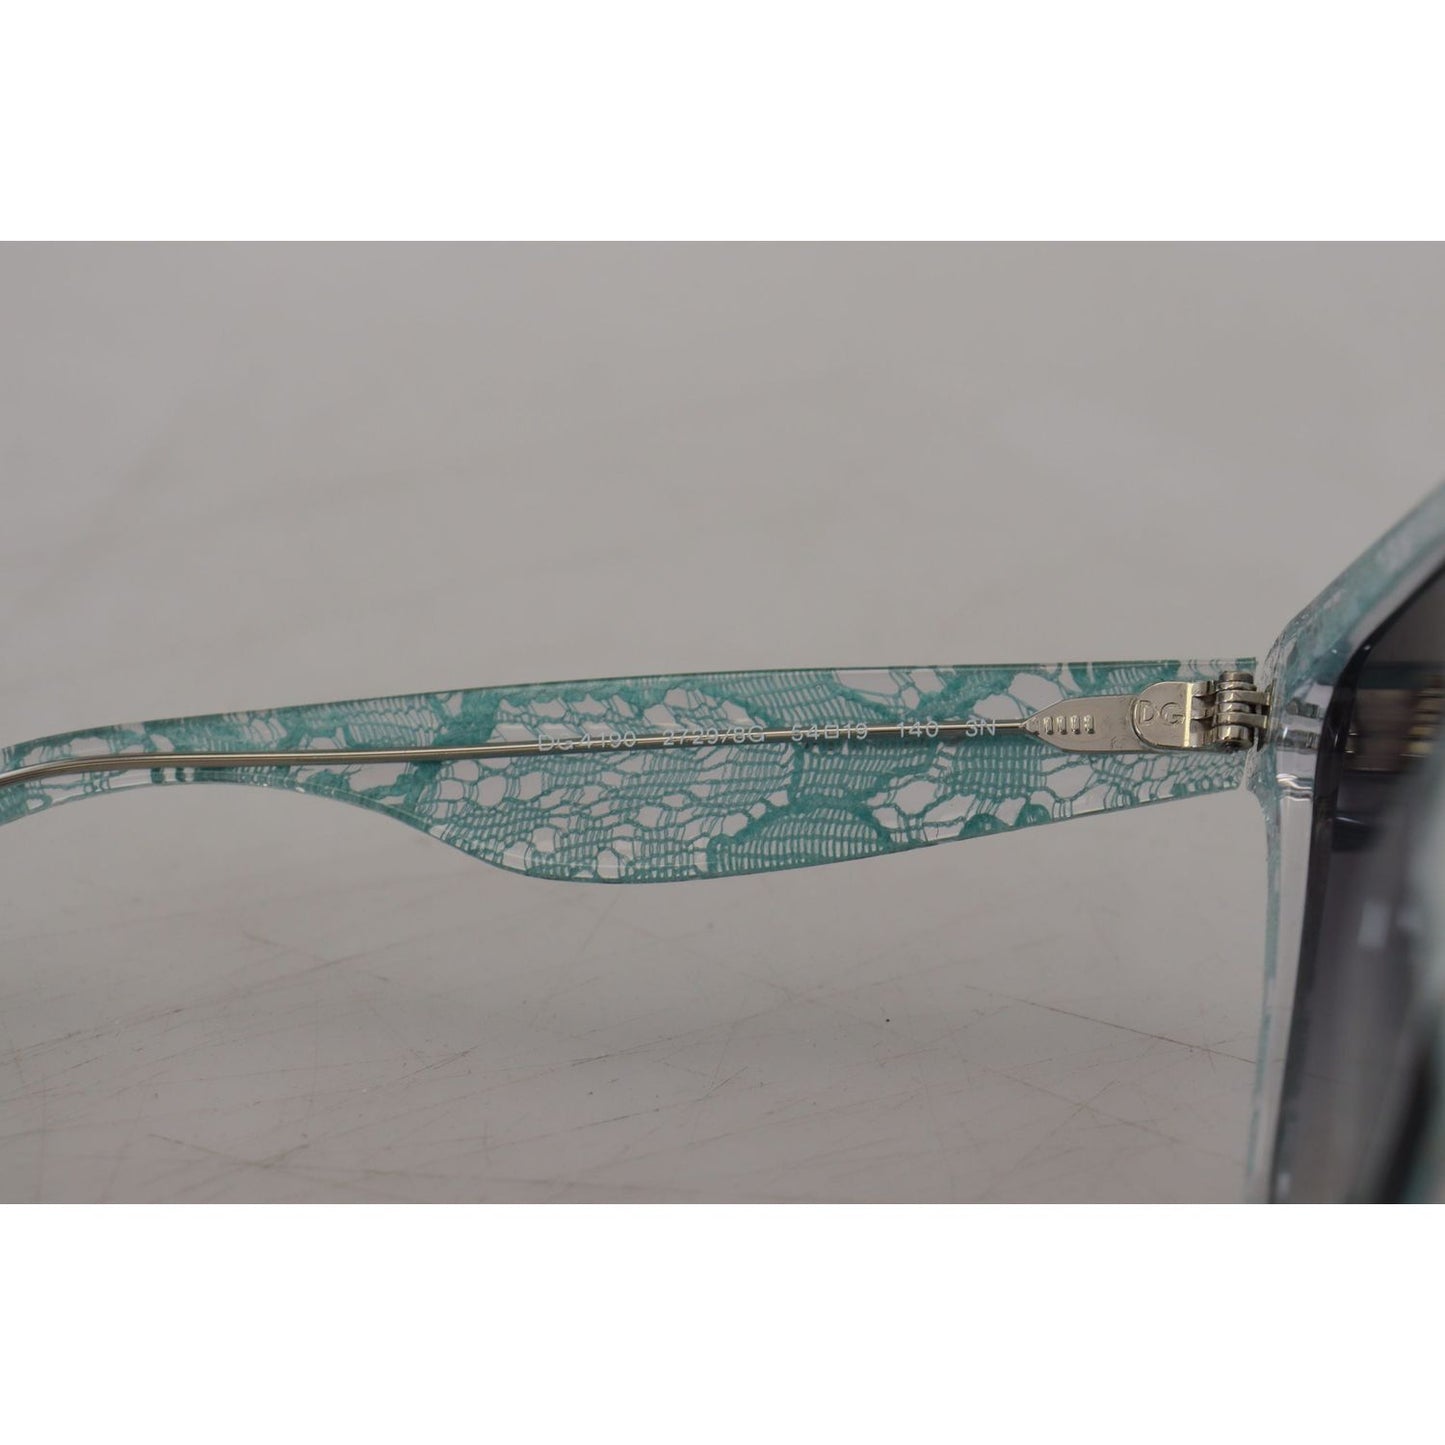 Dolce & Gabbana Sicilian Lace Crystal-Infused Sunglasses blue-lace-crystal-acetate-butterfly-dg4190-sunglasses-1